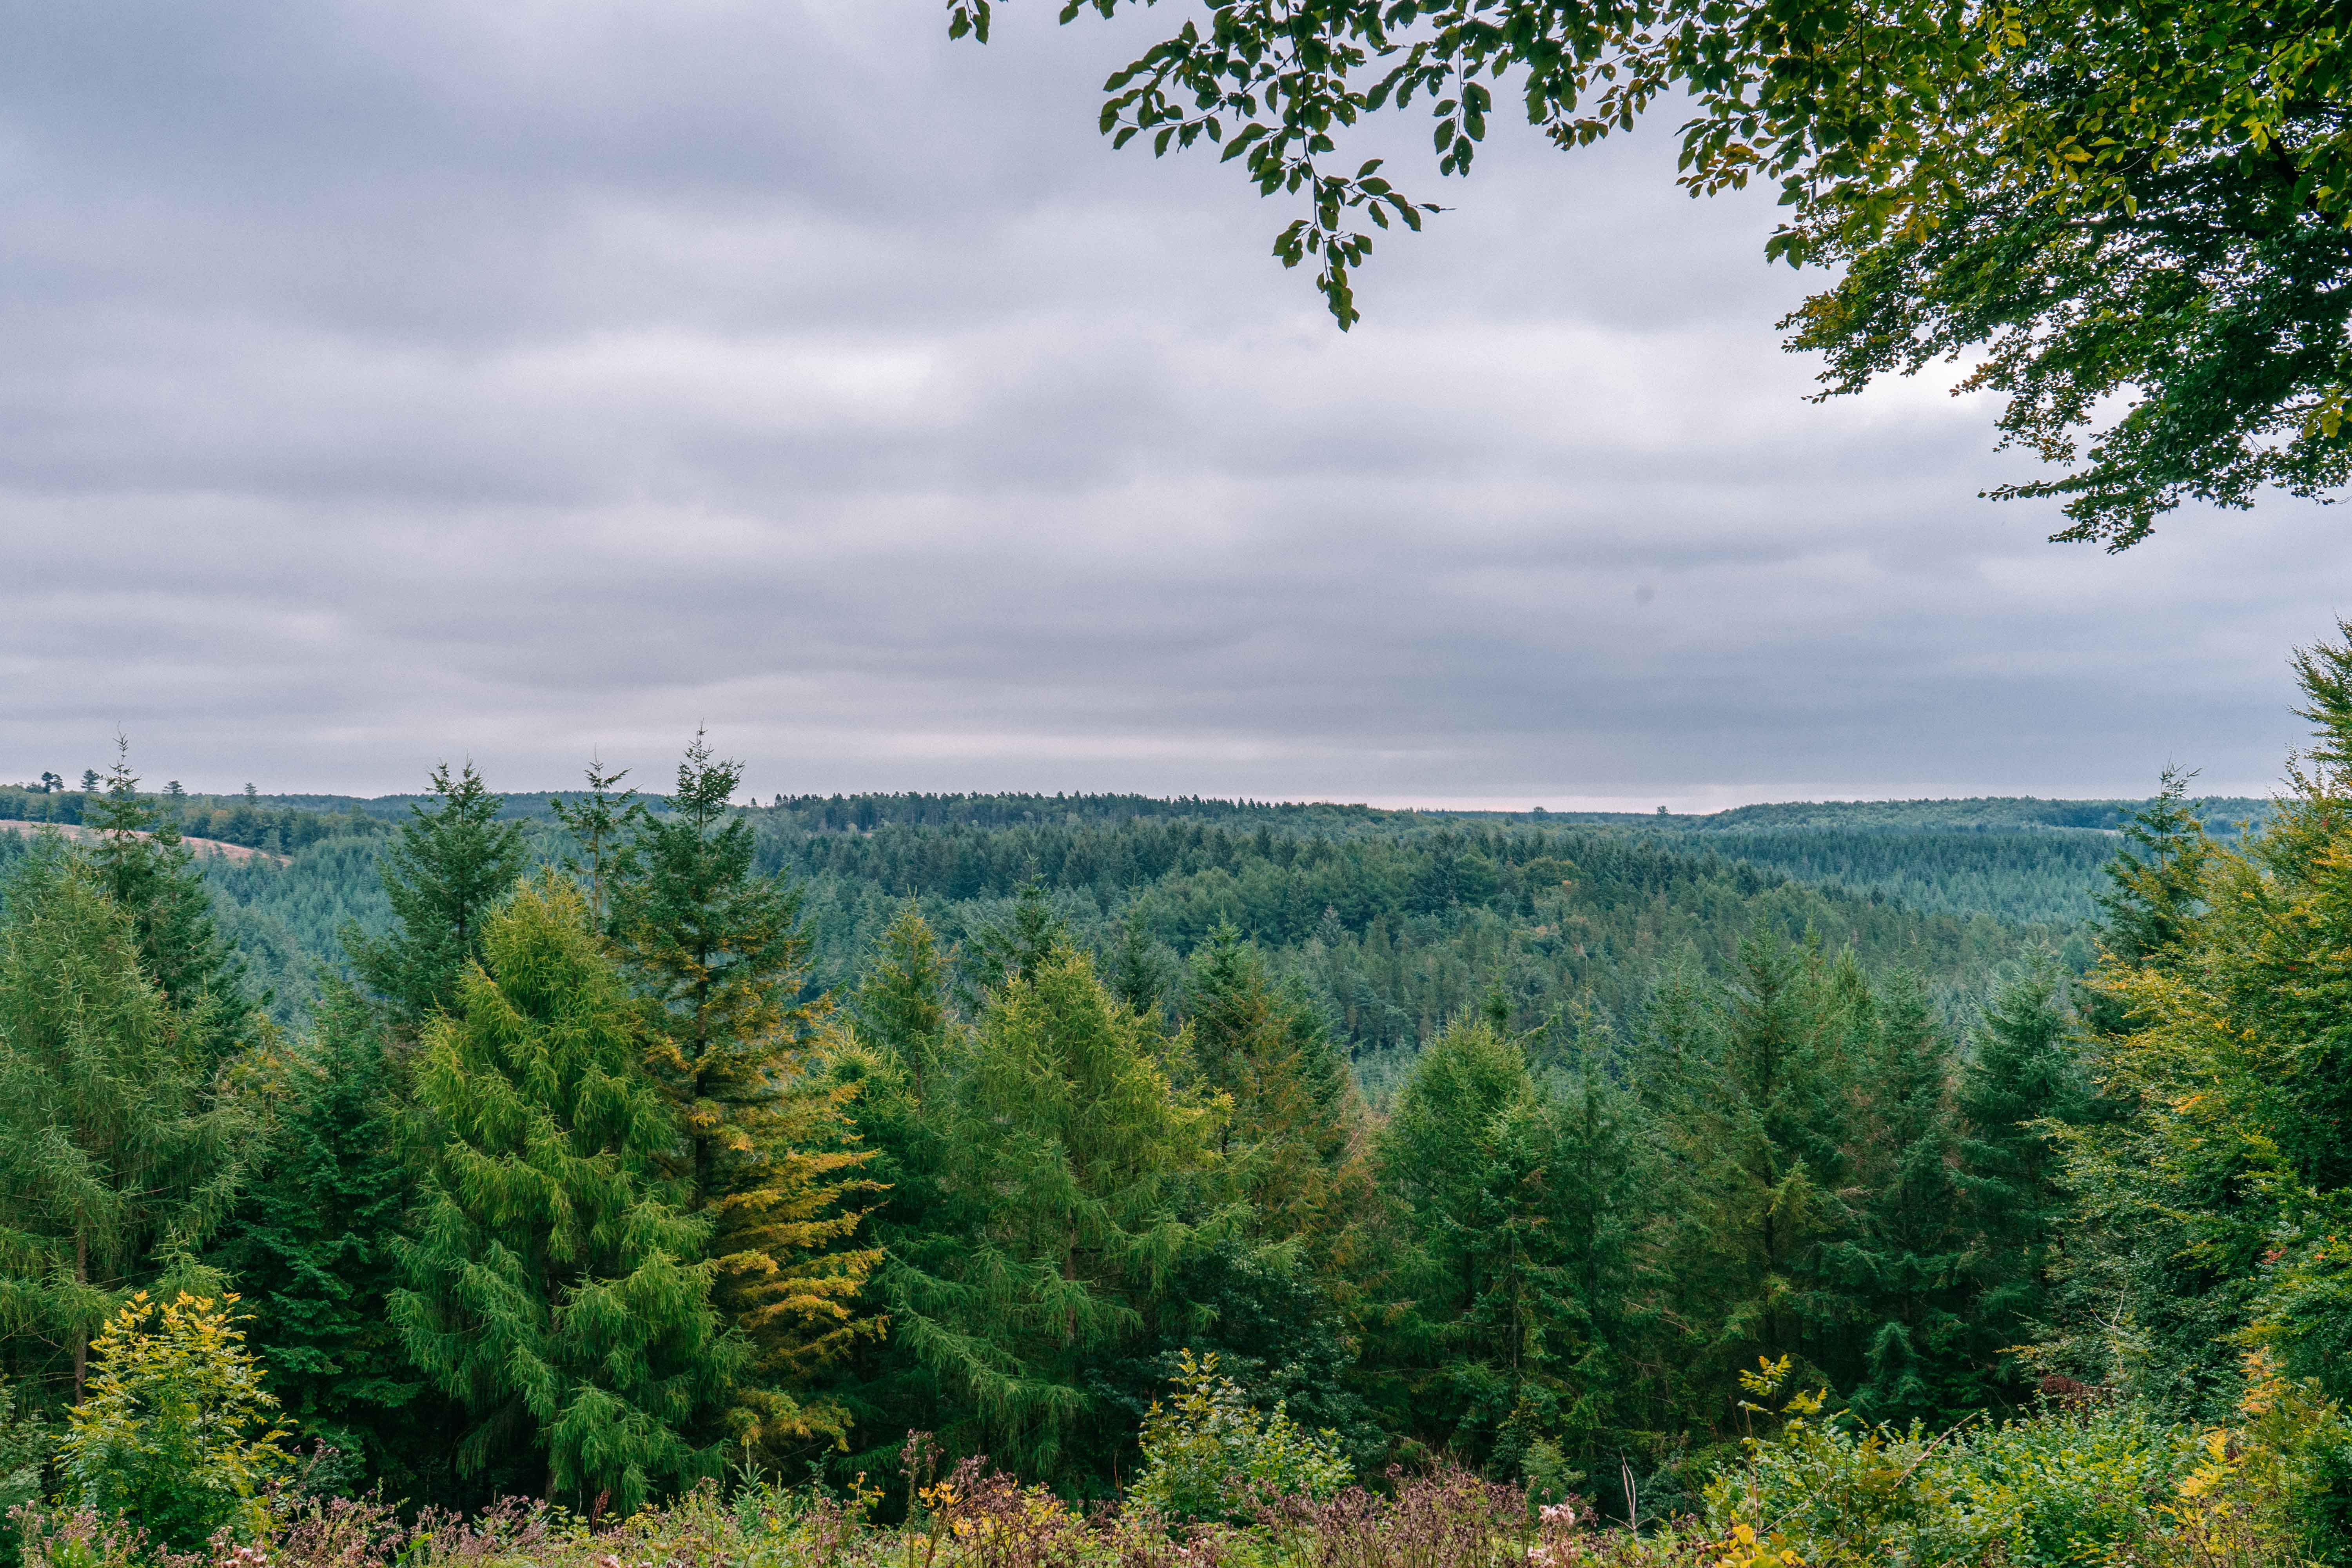 The view over England’s Dalby Forest, North Yorkshire